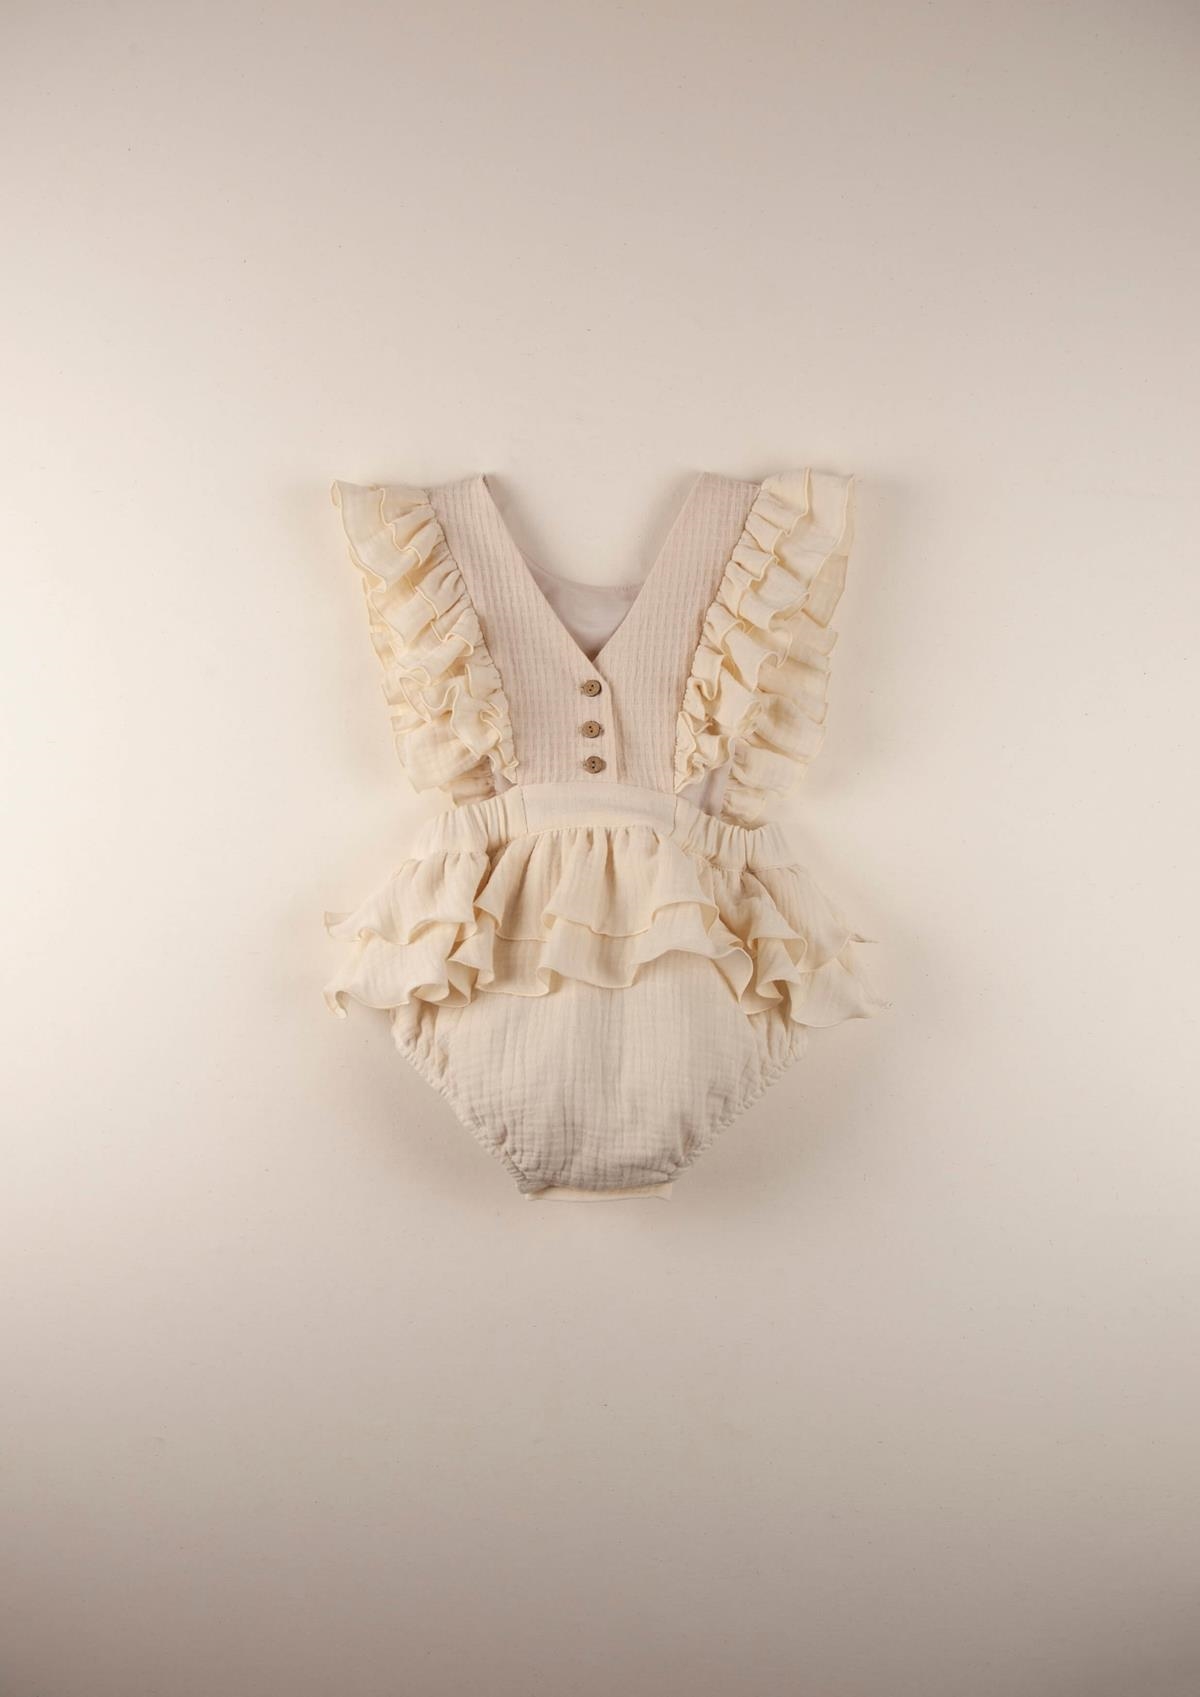 Mod.6.4 Off white romper suit with embroidered bib | SS22 Mod.6.4 Off white romper suit with embroidered bib | 1